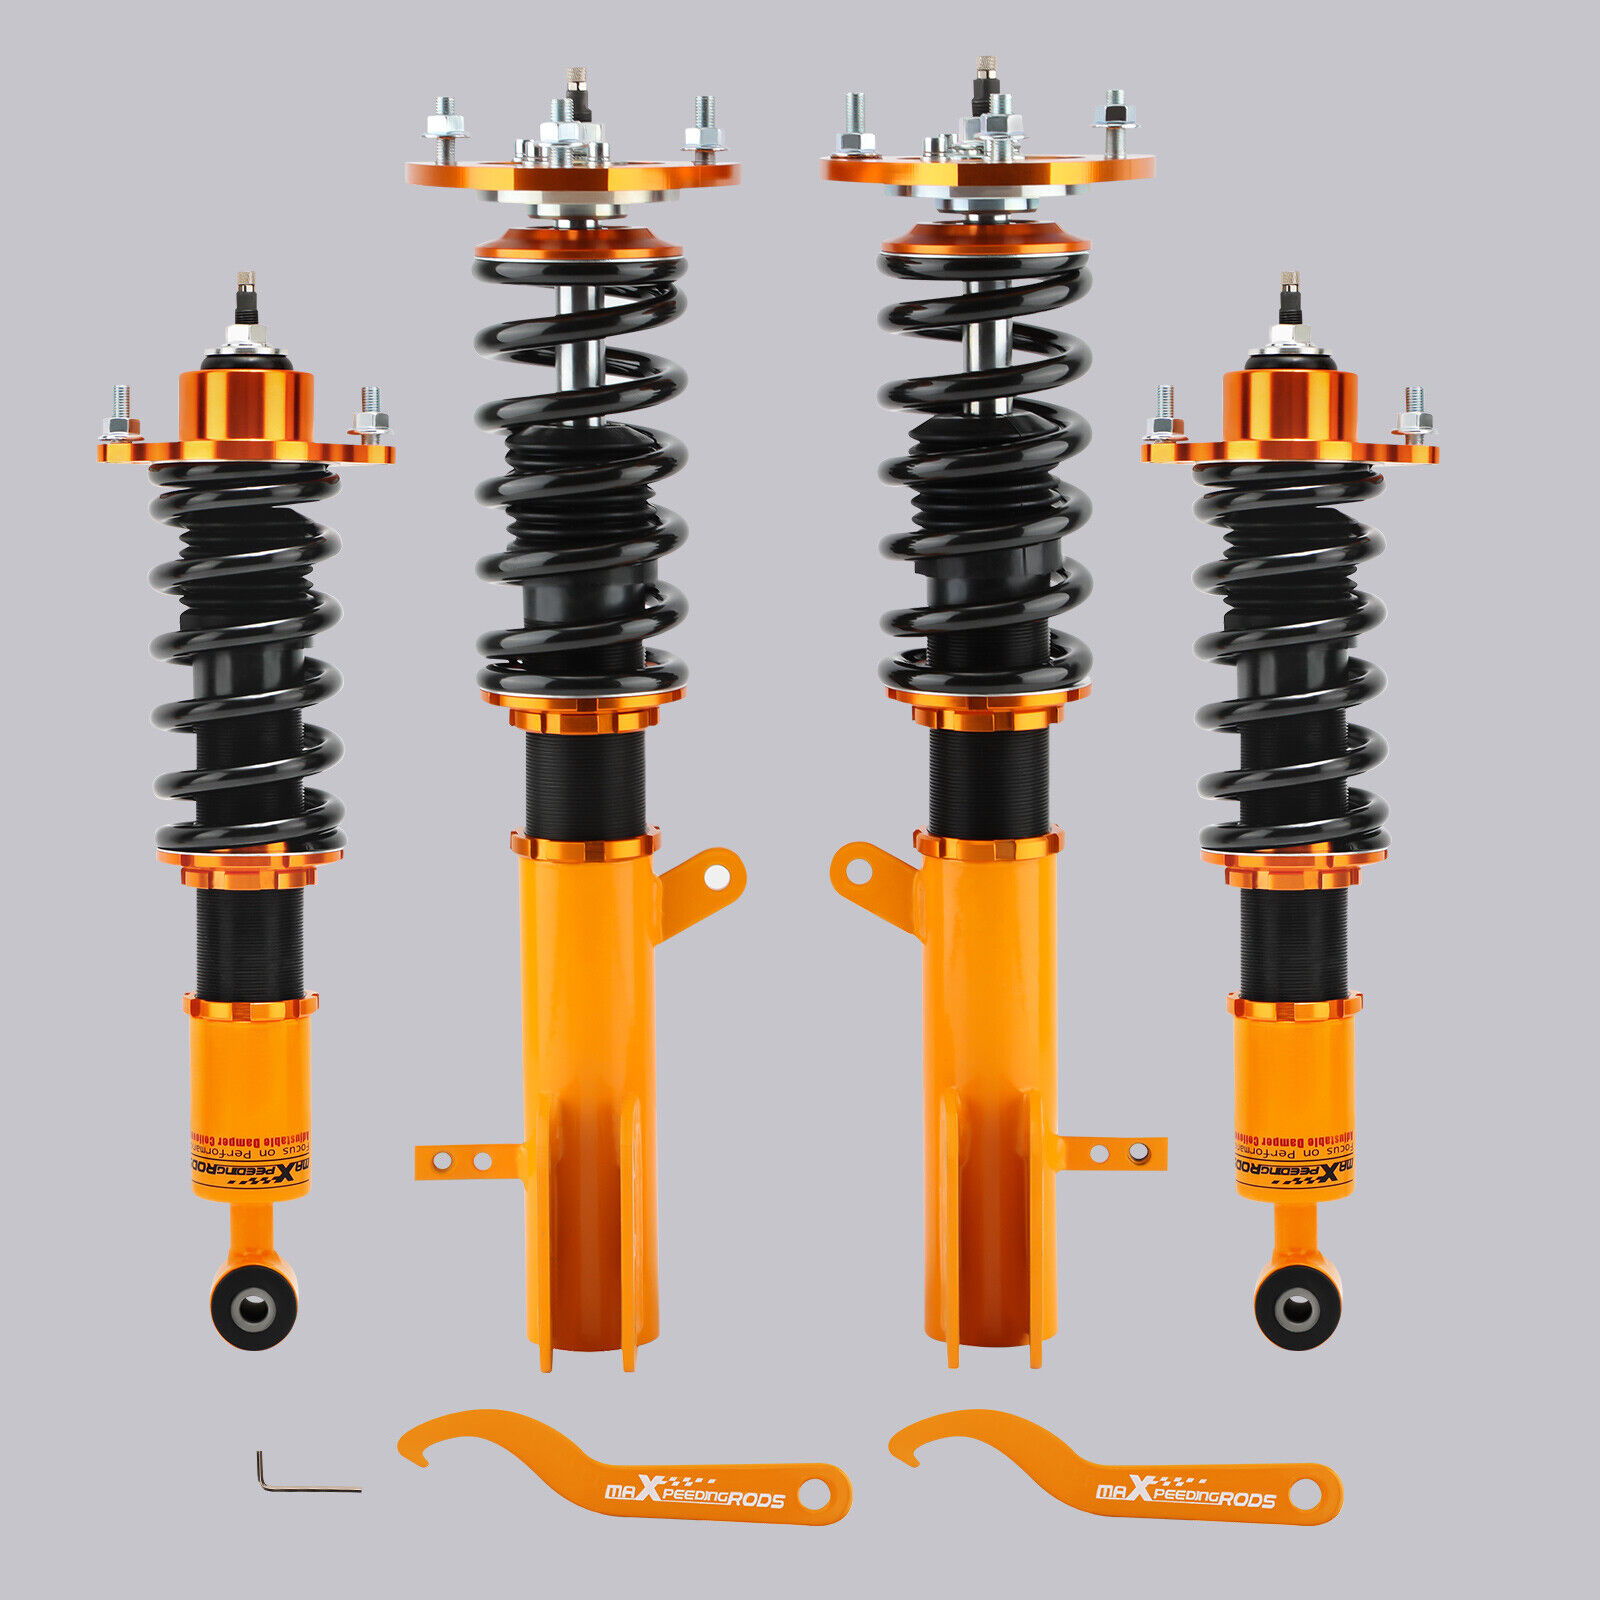 Coilover Kits for Dodge Caliber Adj. Height 2007-2010 Shock Absorbers Struts